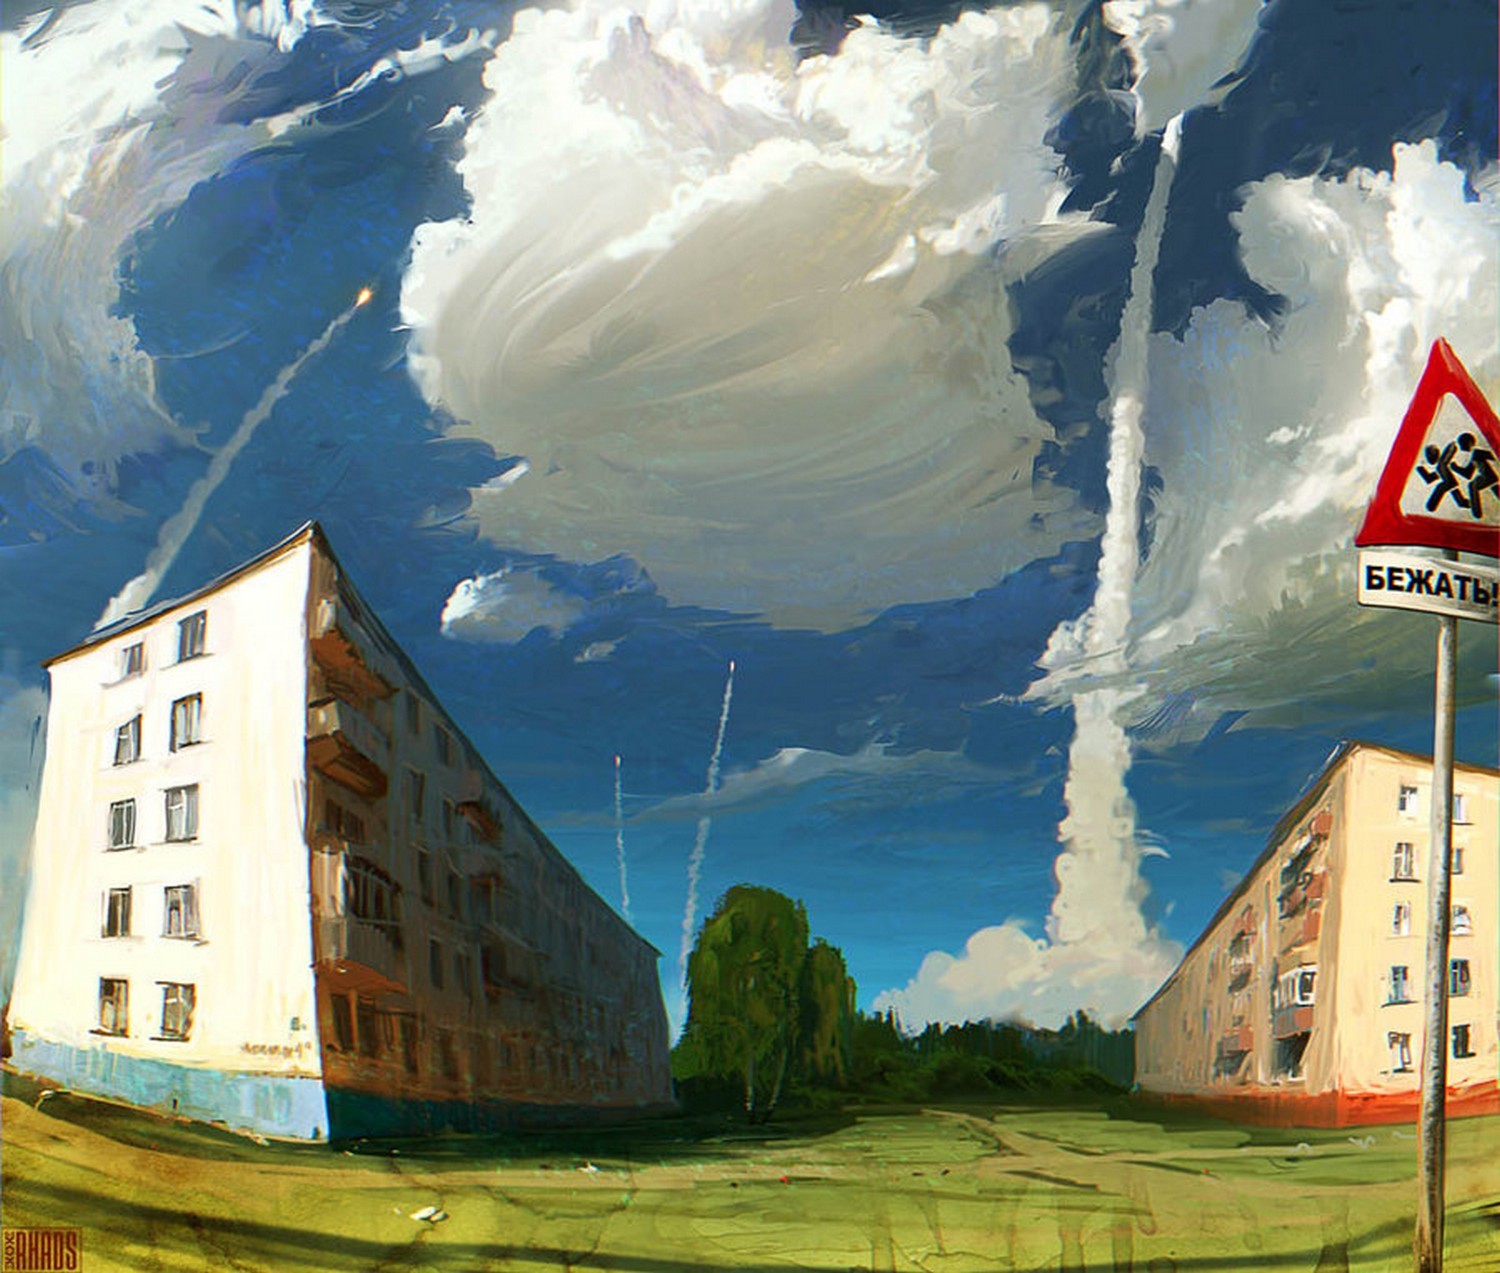 General 1500x1273 landscape sky clouds Russian missiles artwork signs apocalyptic house building